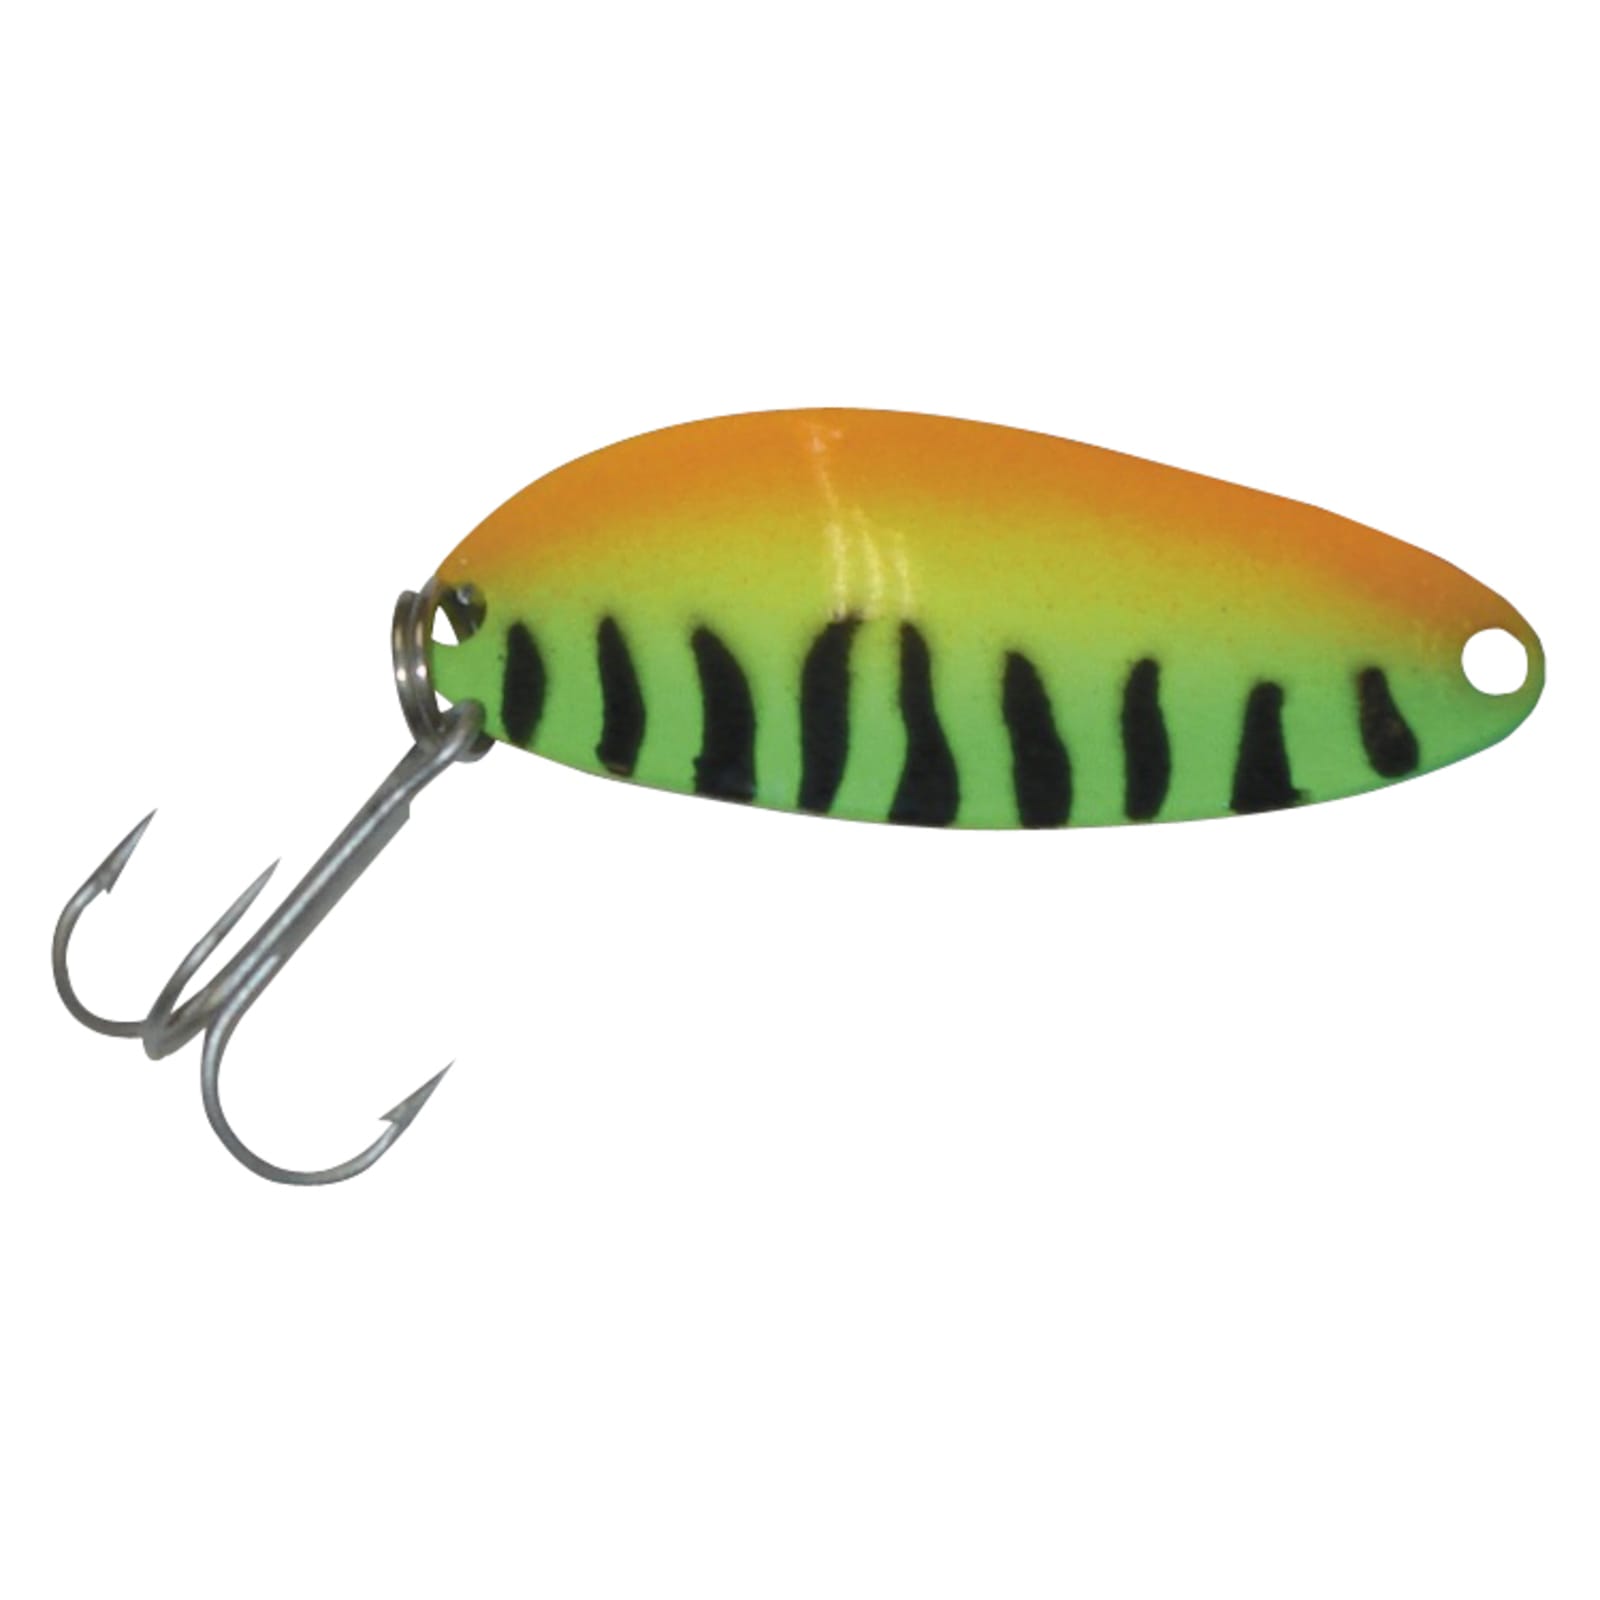 Little Cleo Spoon - Firetiger by Acme Tackle Company at Fleet Farm